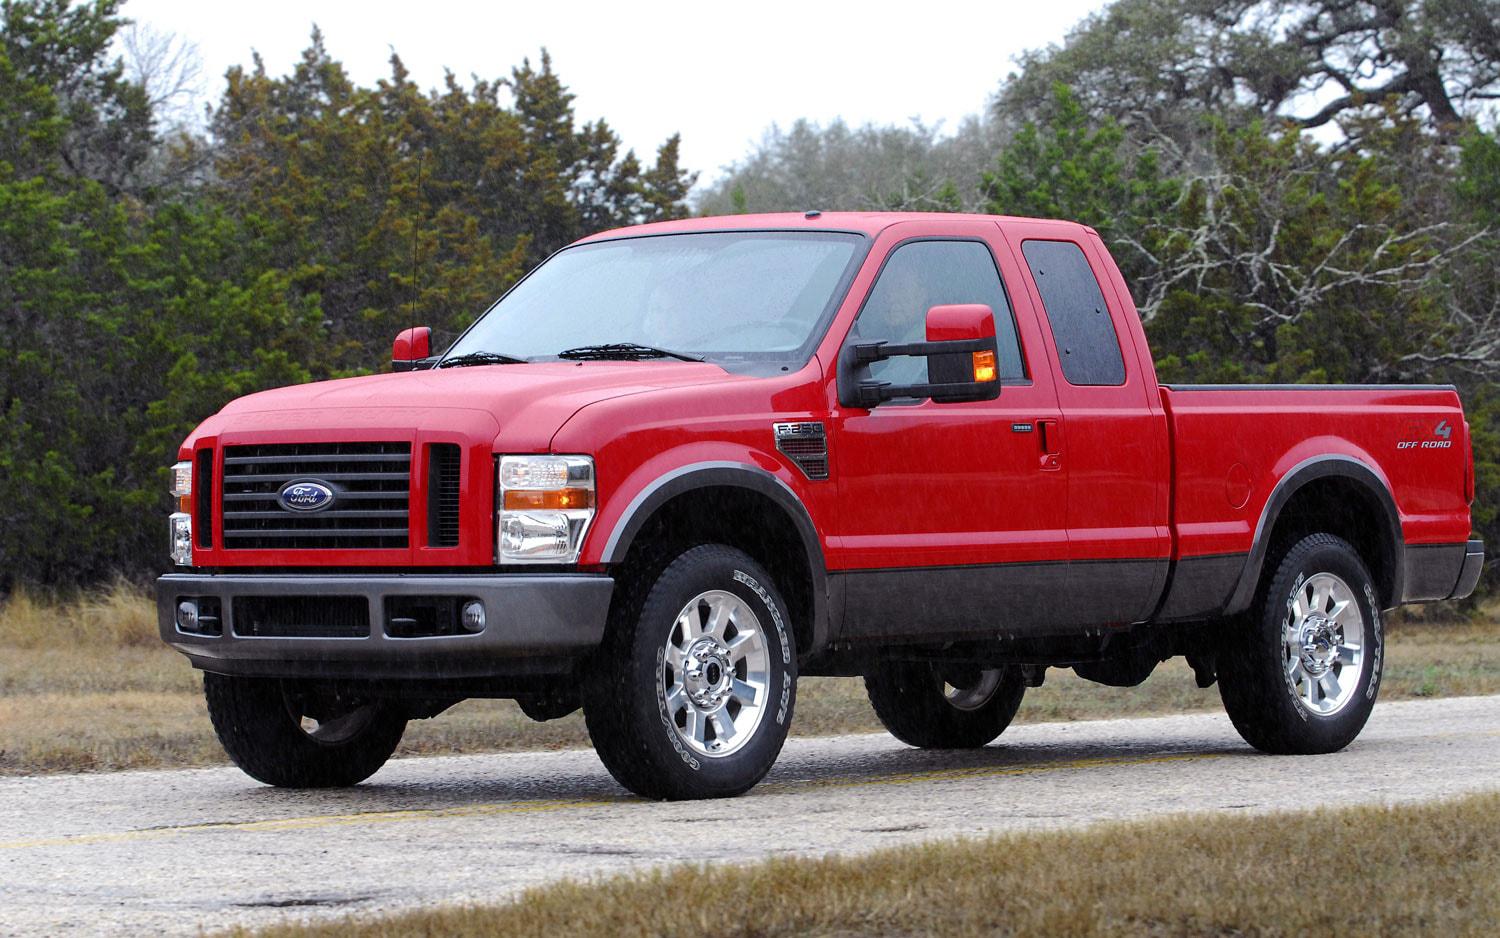 2008 Ford F-250 Super Cab. The official truck of? : r/regularcarreviews